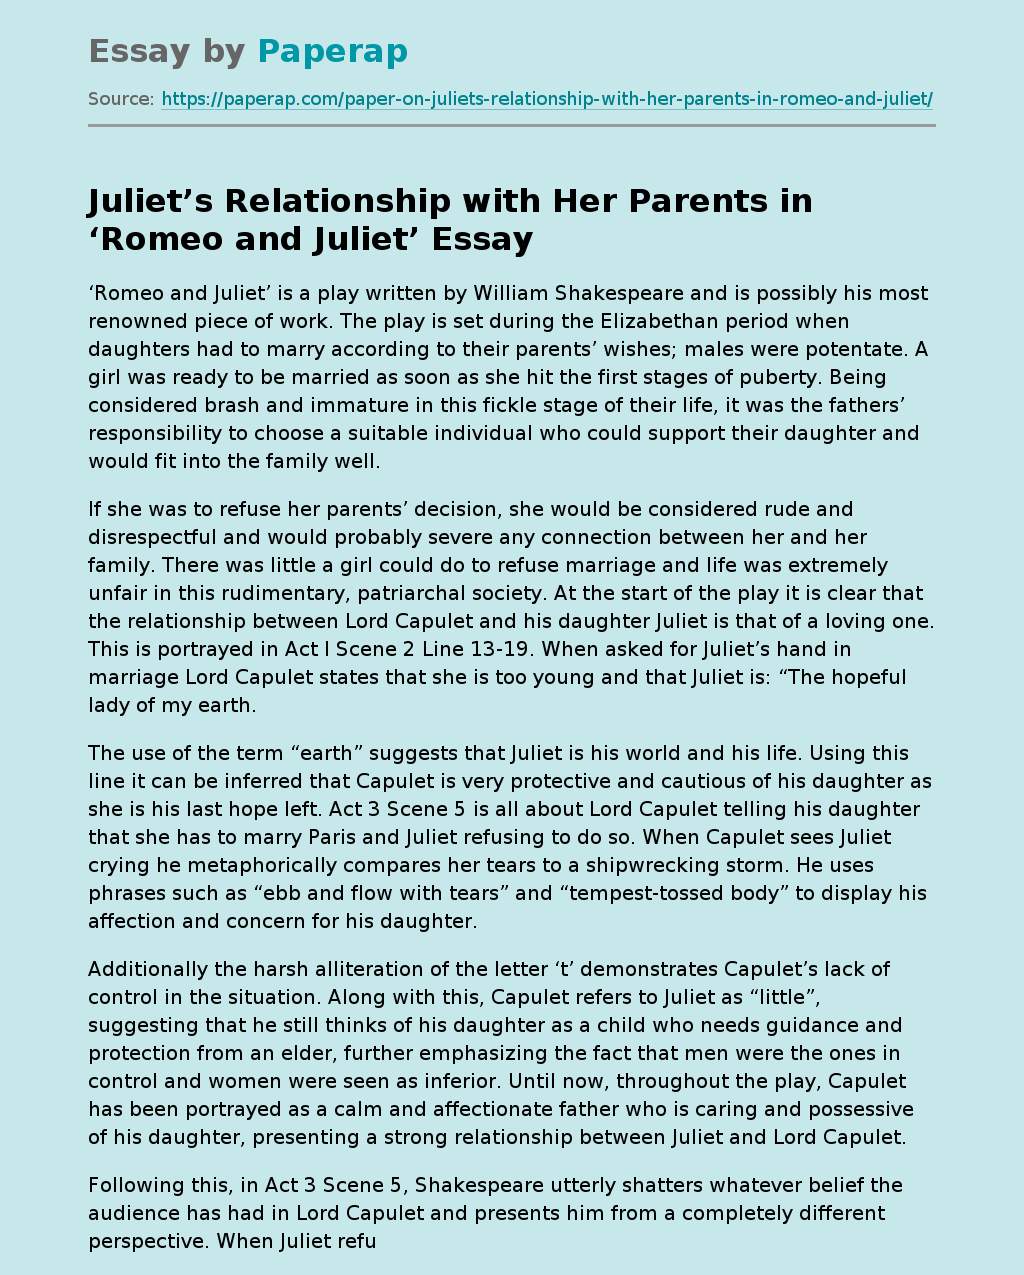 Juliet’s Relationship with Her Parents in ‘Romeo and Juliet’